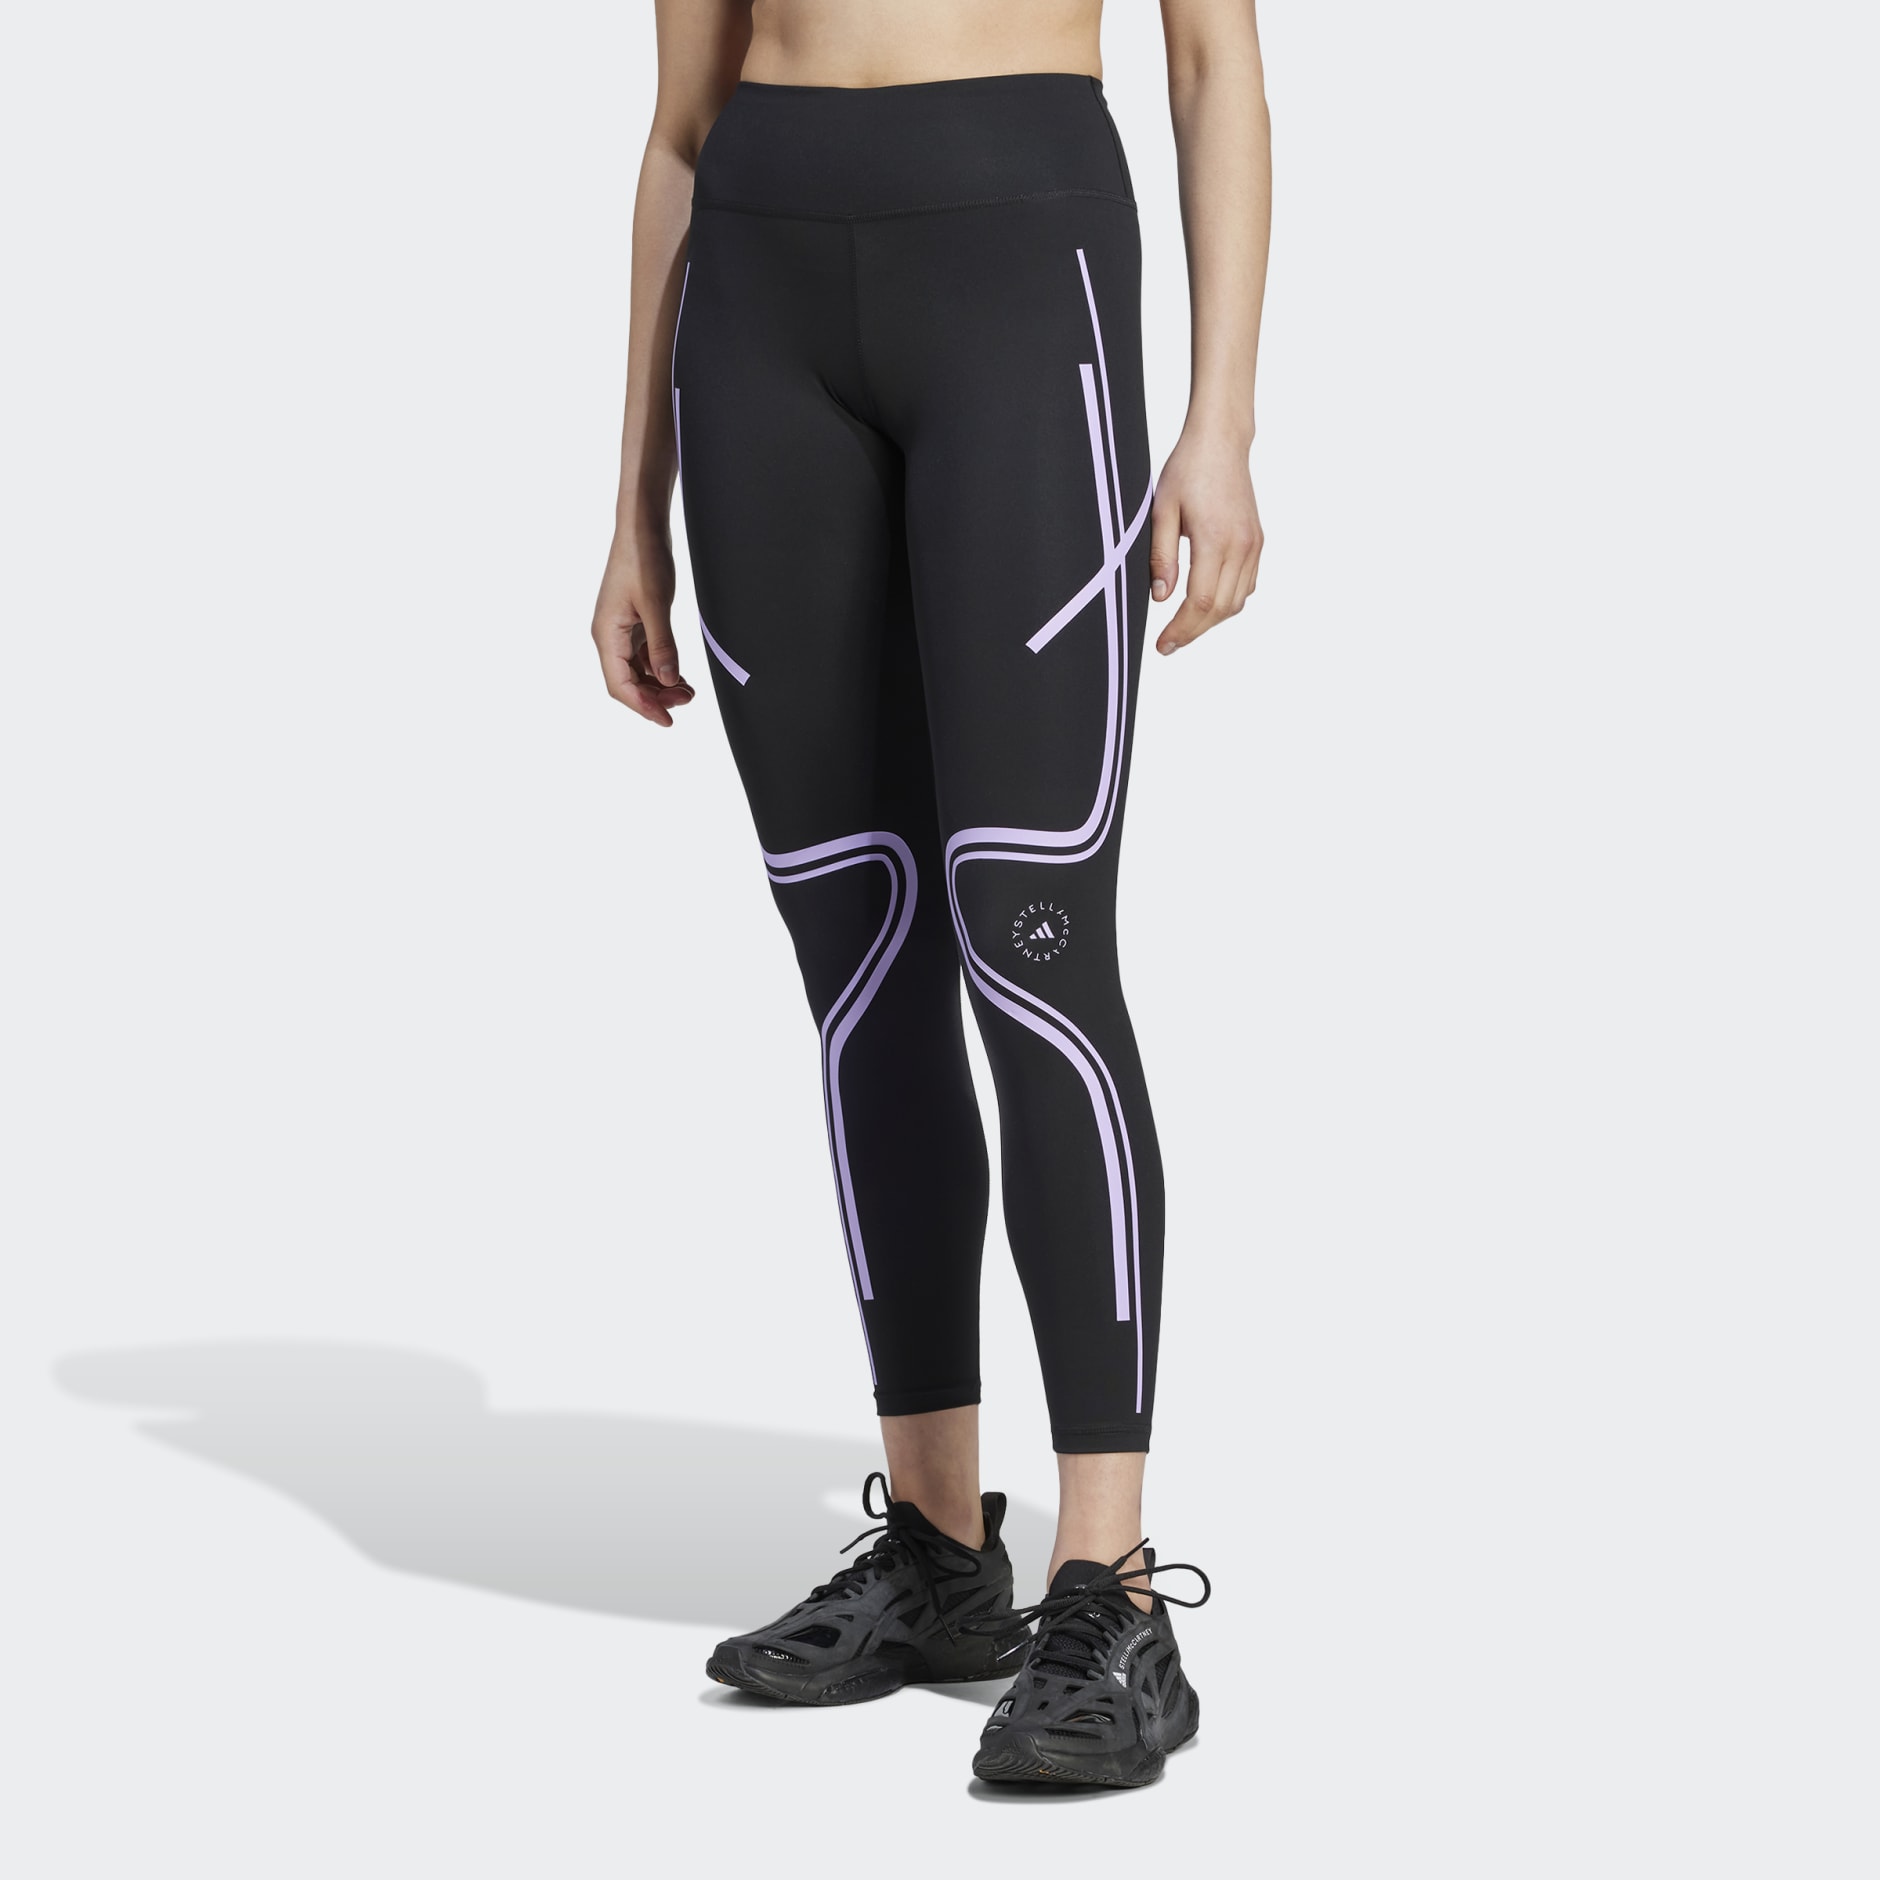 CW-X Comfort Athletic Tights for Women